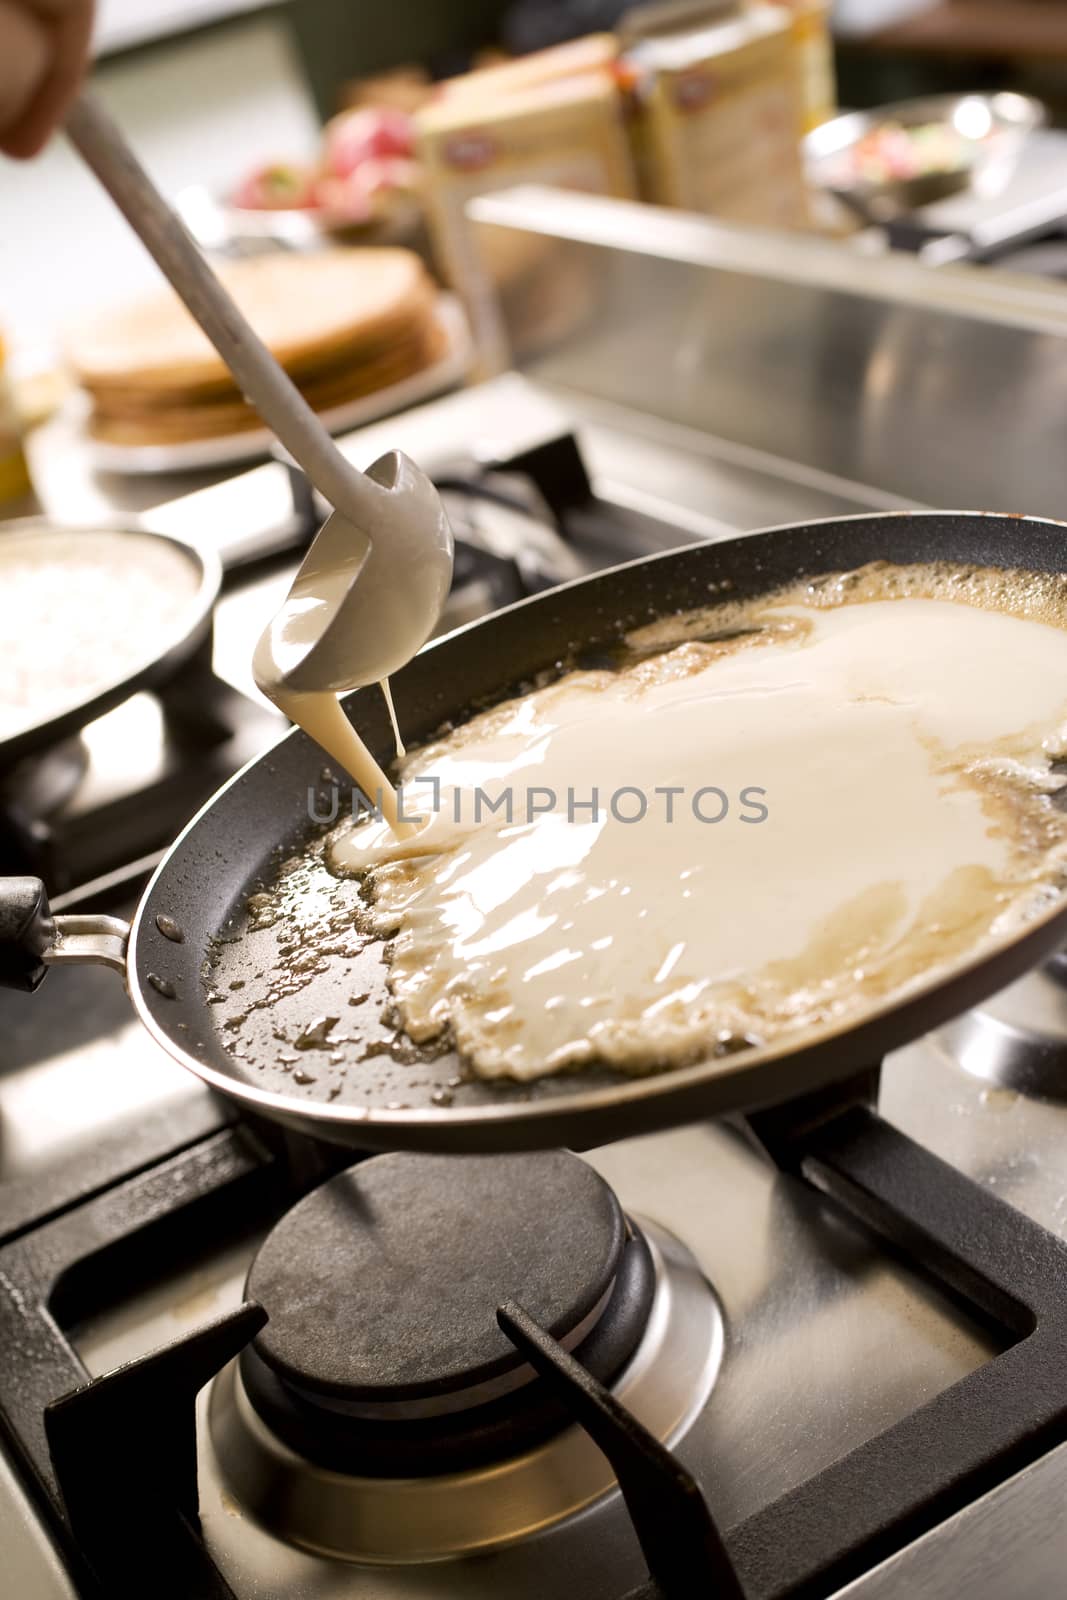 pancakes cooking on the hot stove griddle. Shallow depth of fiel